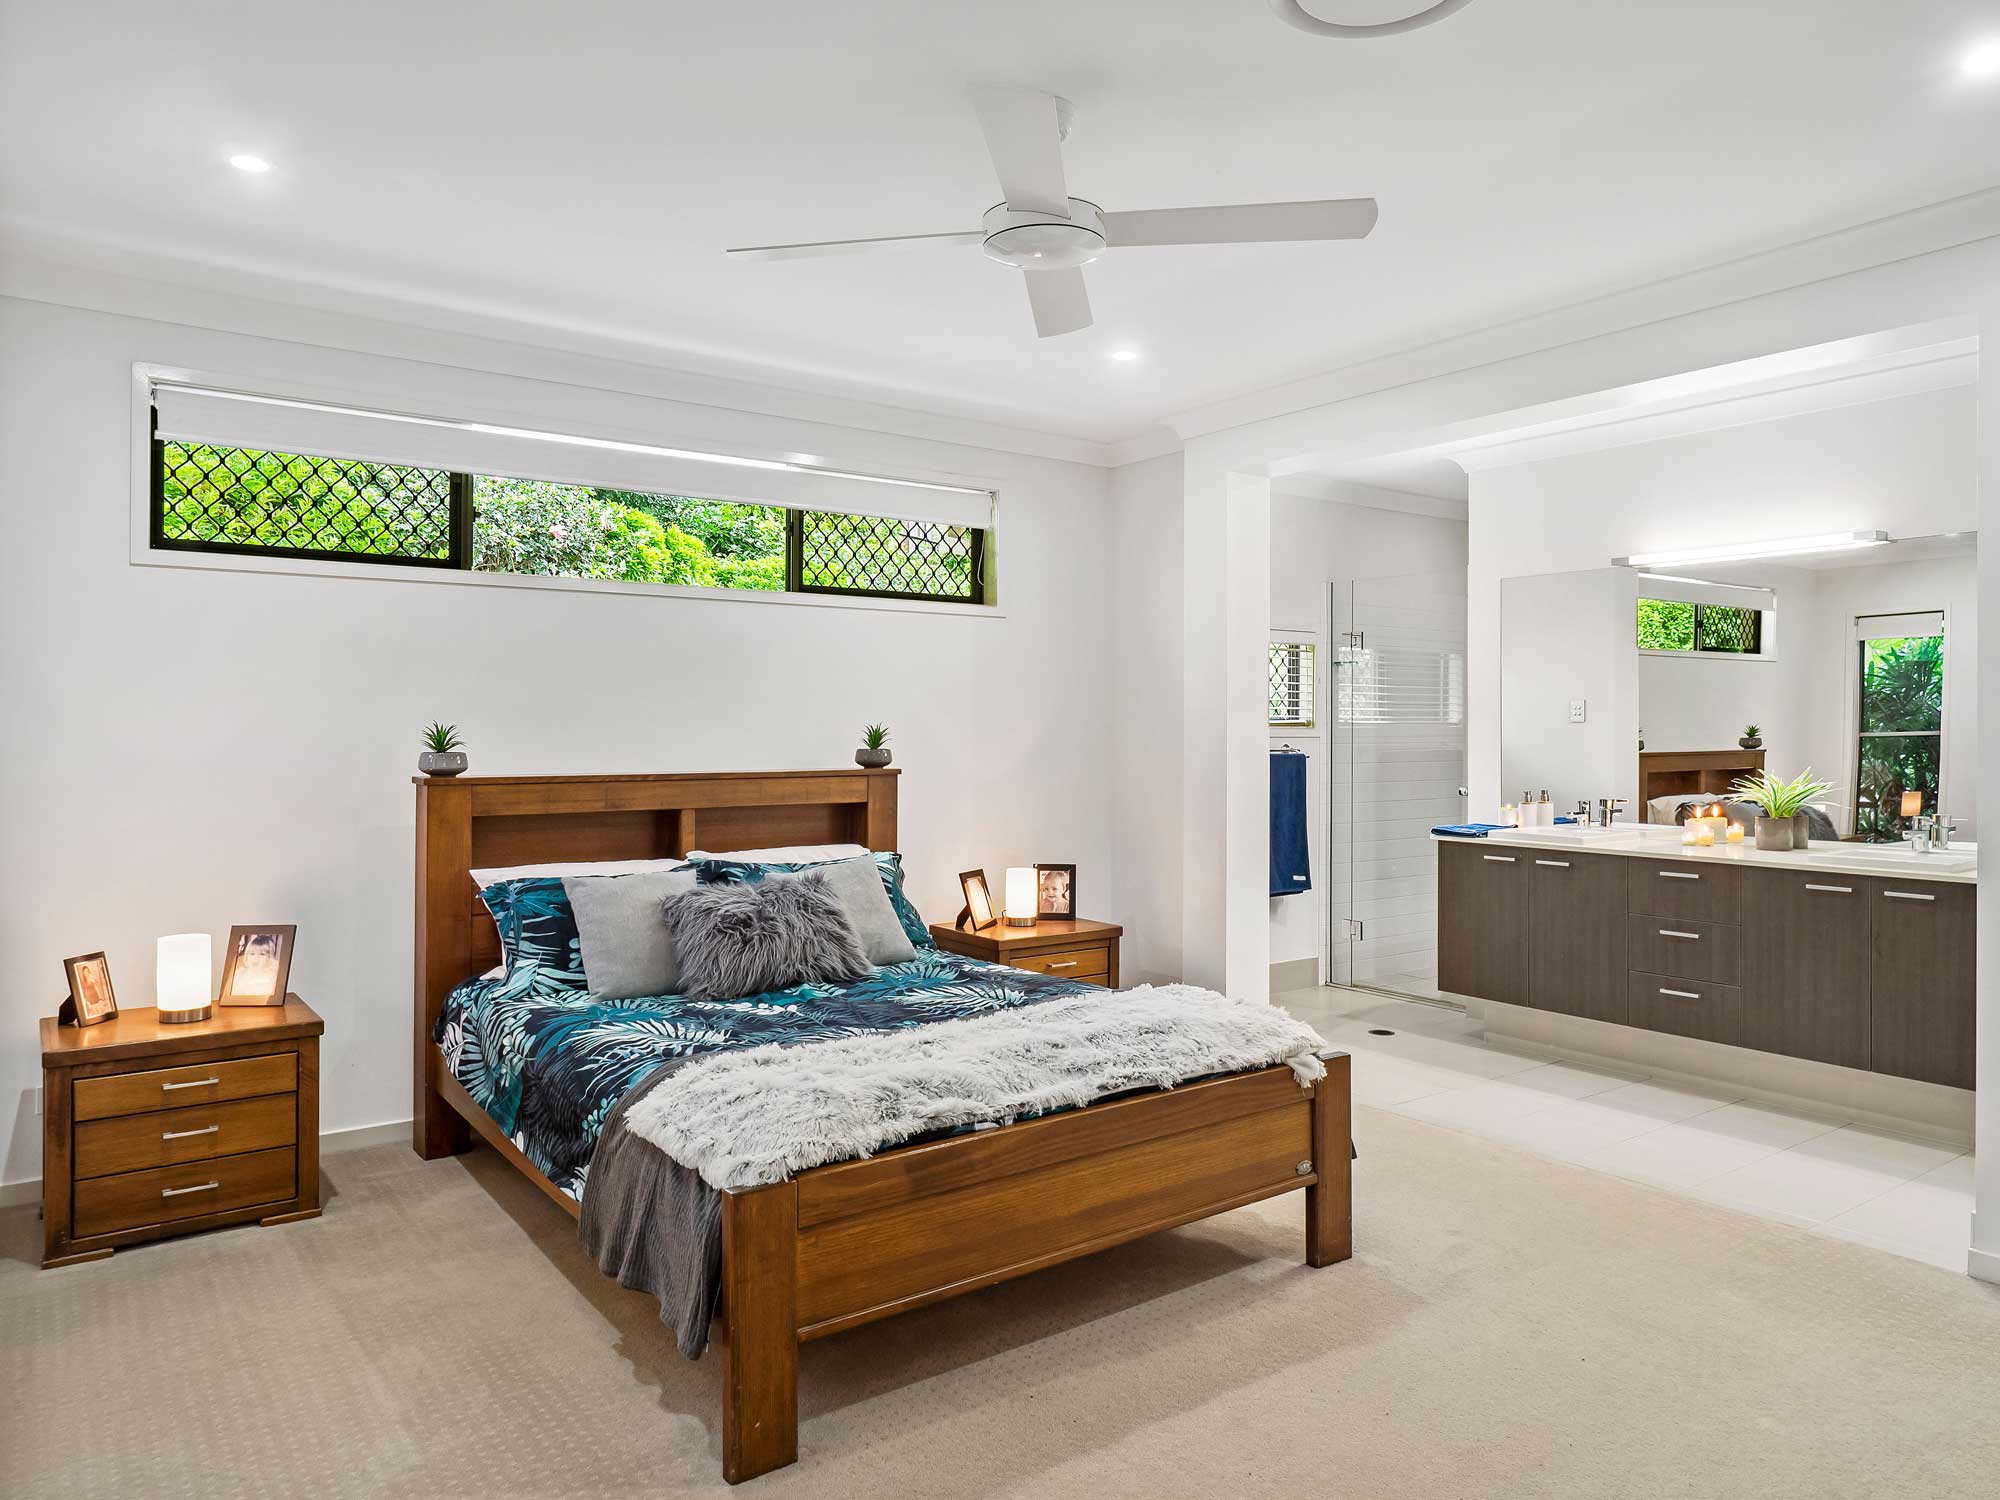 Real estate photography for a new home listing at Cashmere, Brisbane north side